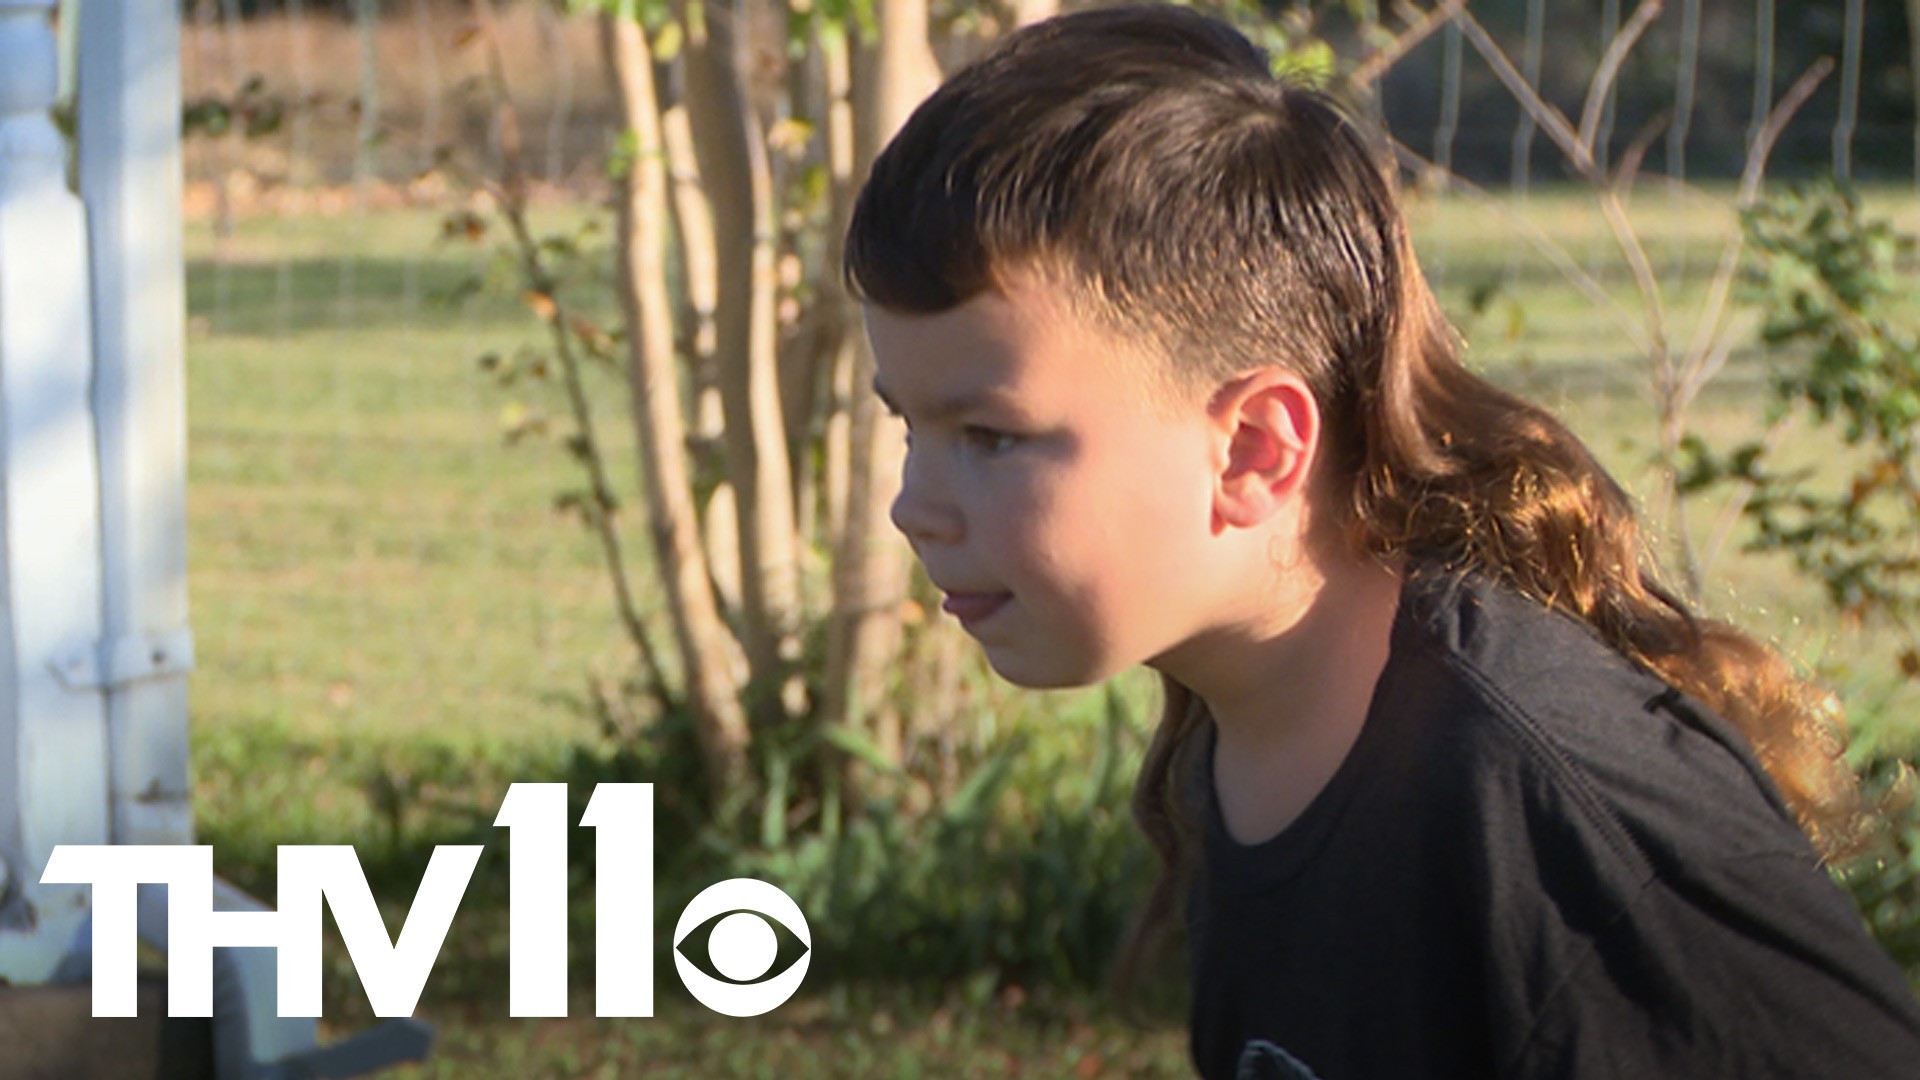 Jaxson Crossland, an 8-year-old from Farmersville, Texas has been awarded the title of best mullet in America!